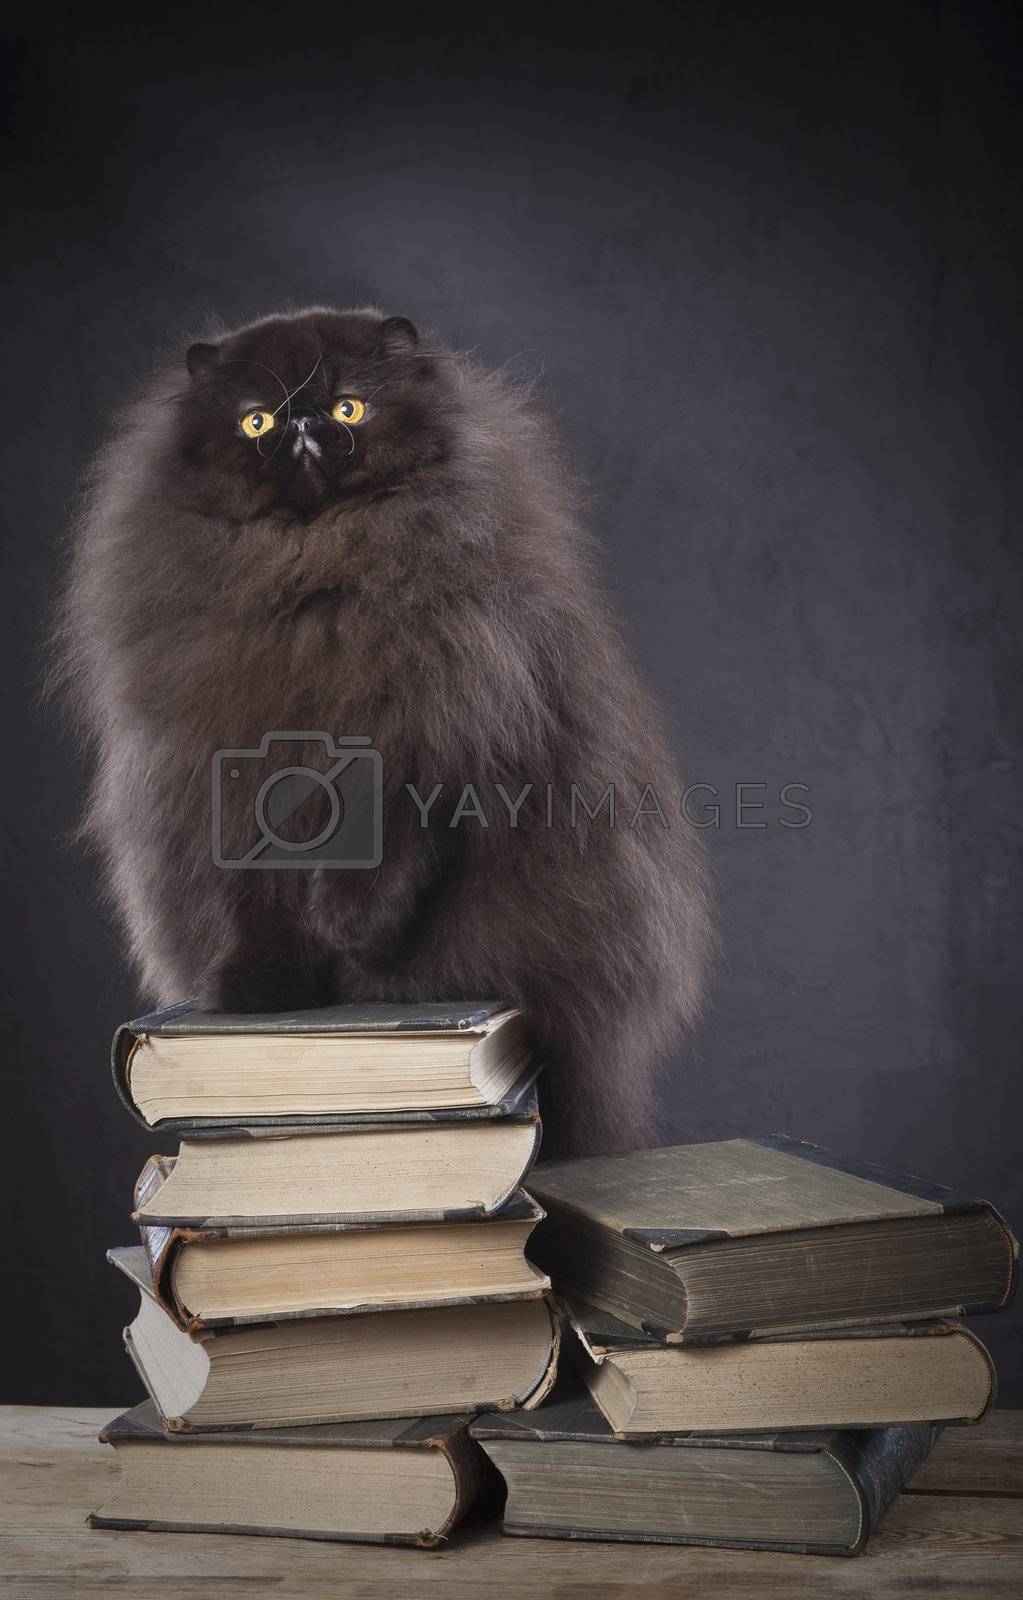 Royalty free image of Long haired persian cat on the top of book pile by mjp